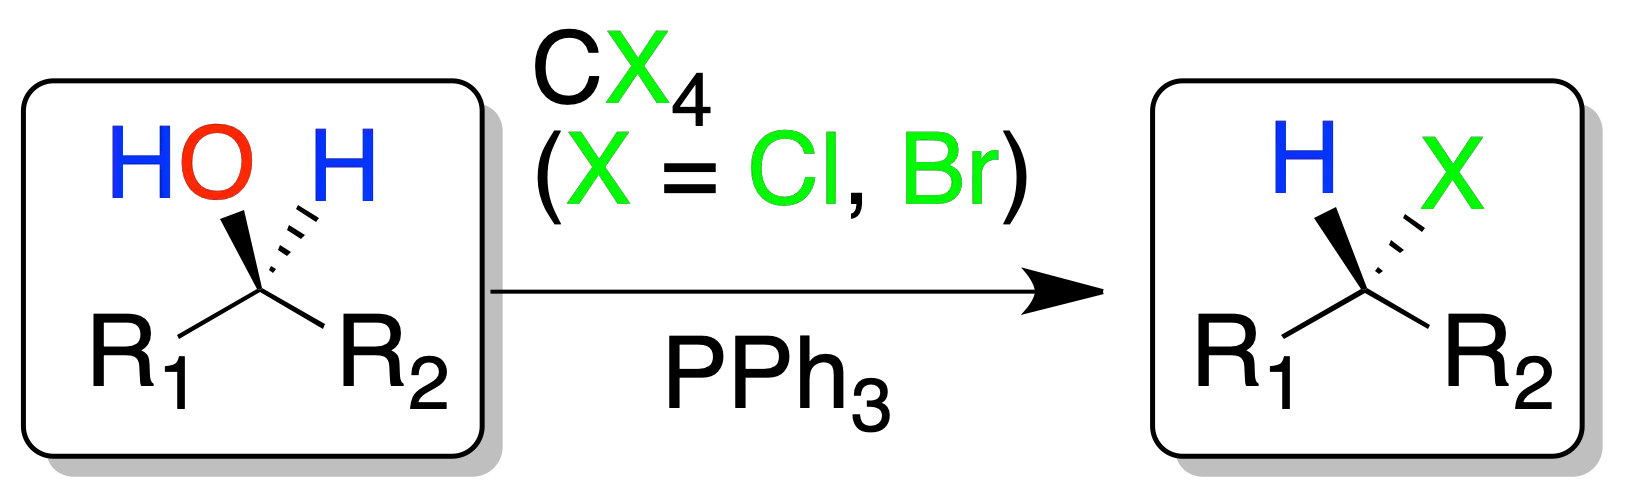 Reactions of Alcohols, Ethers and Oxiranes: Conversion of alcohols to haloalkanes; Reaction of alcohols with CX; Appel reaction